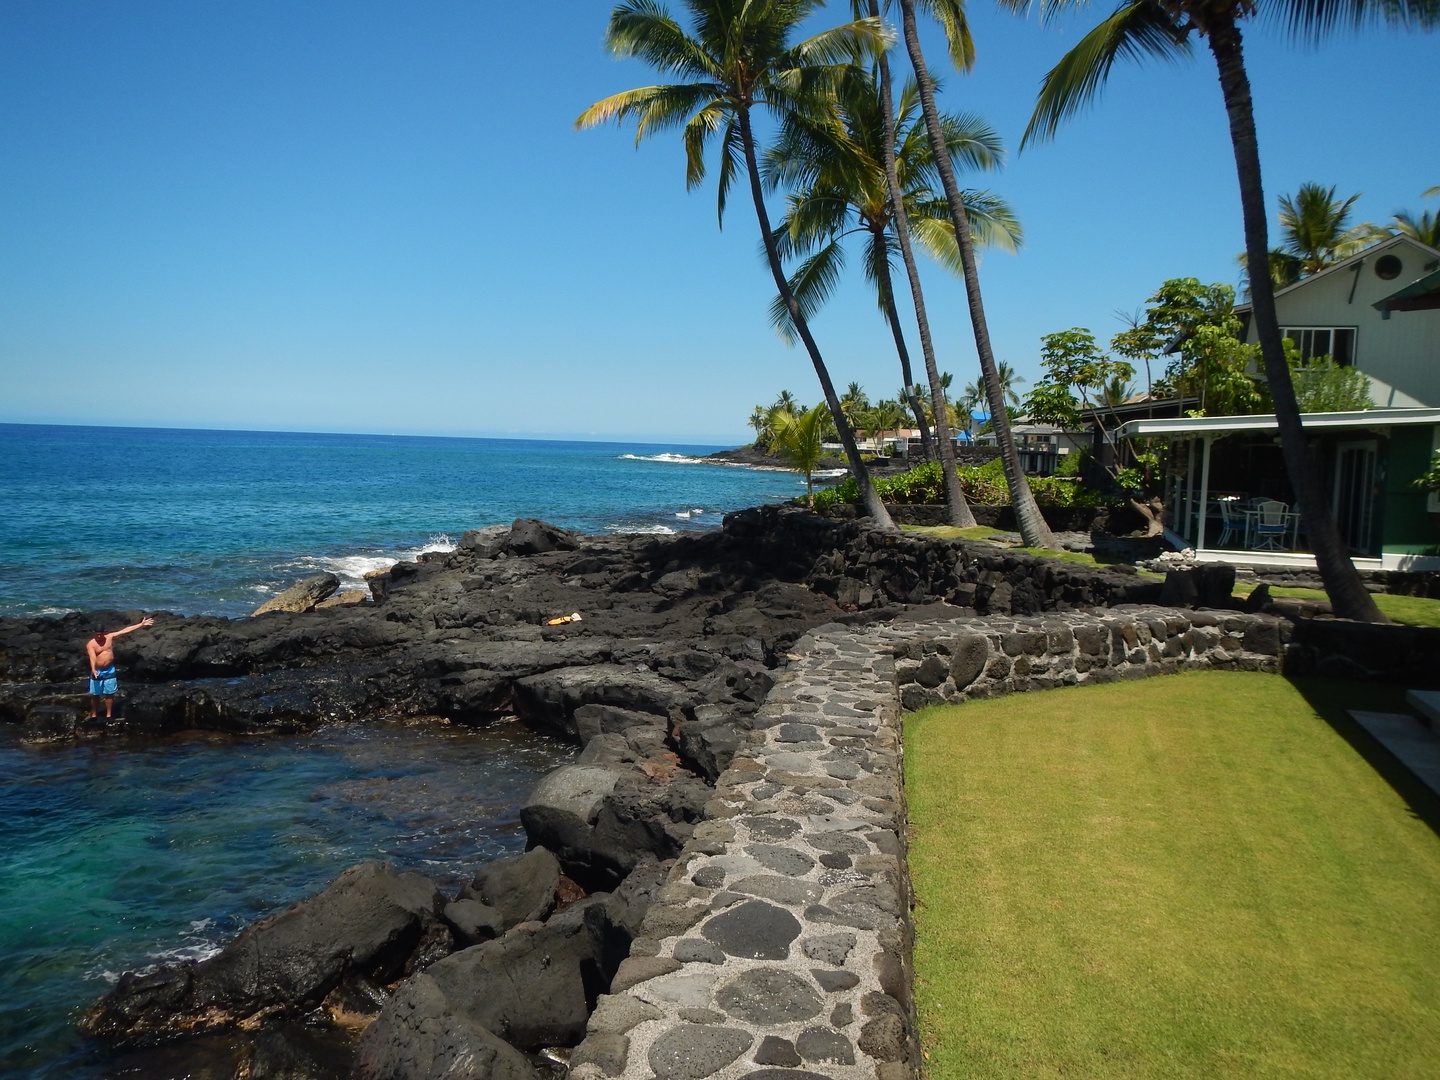 Kailua Kona Vacation Rentals, Hoku'Ea Hale - Private ocean pool accessible from your back yard!